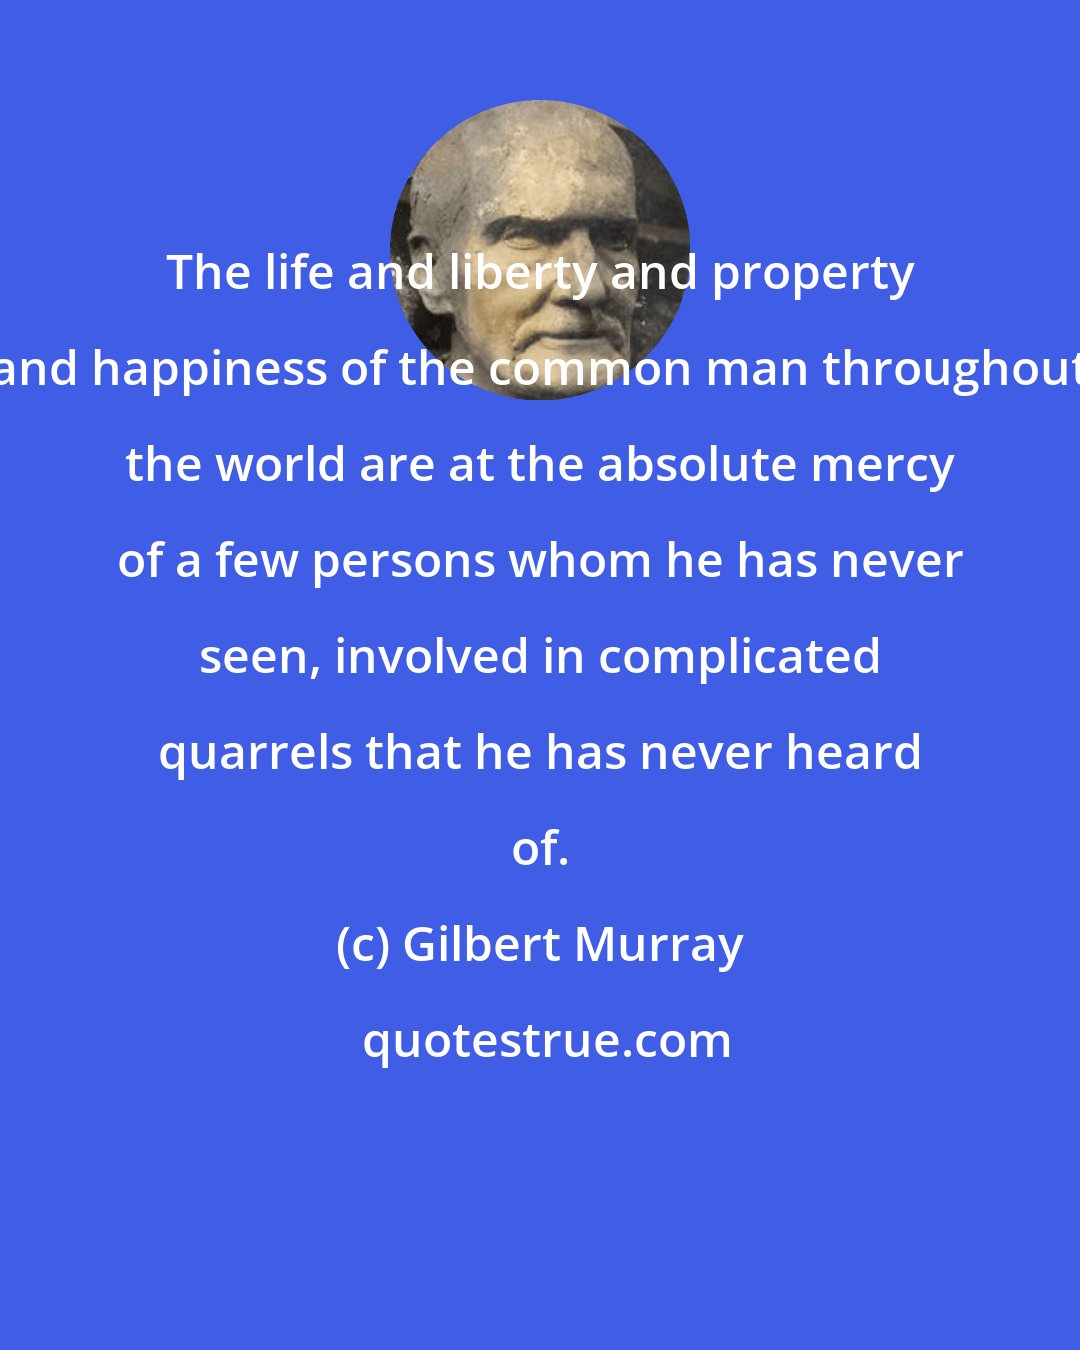 Gilbert Murray: The life and liberty and property and happiness of the common man throughout the world are at the absolute mercy of a few persons whom he has never seen, involved in complicated quarrels that he has never heard of.